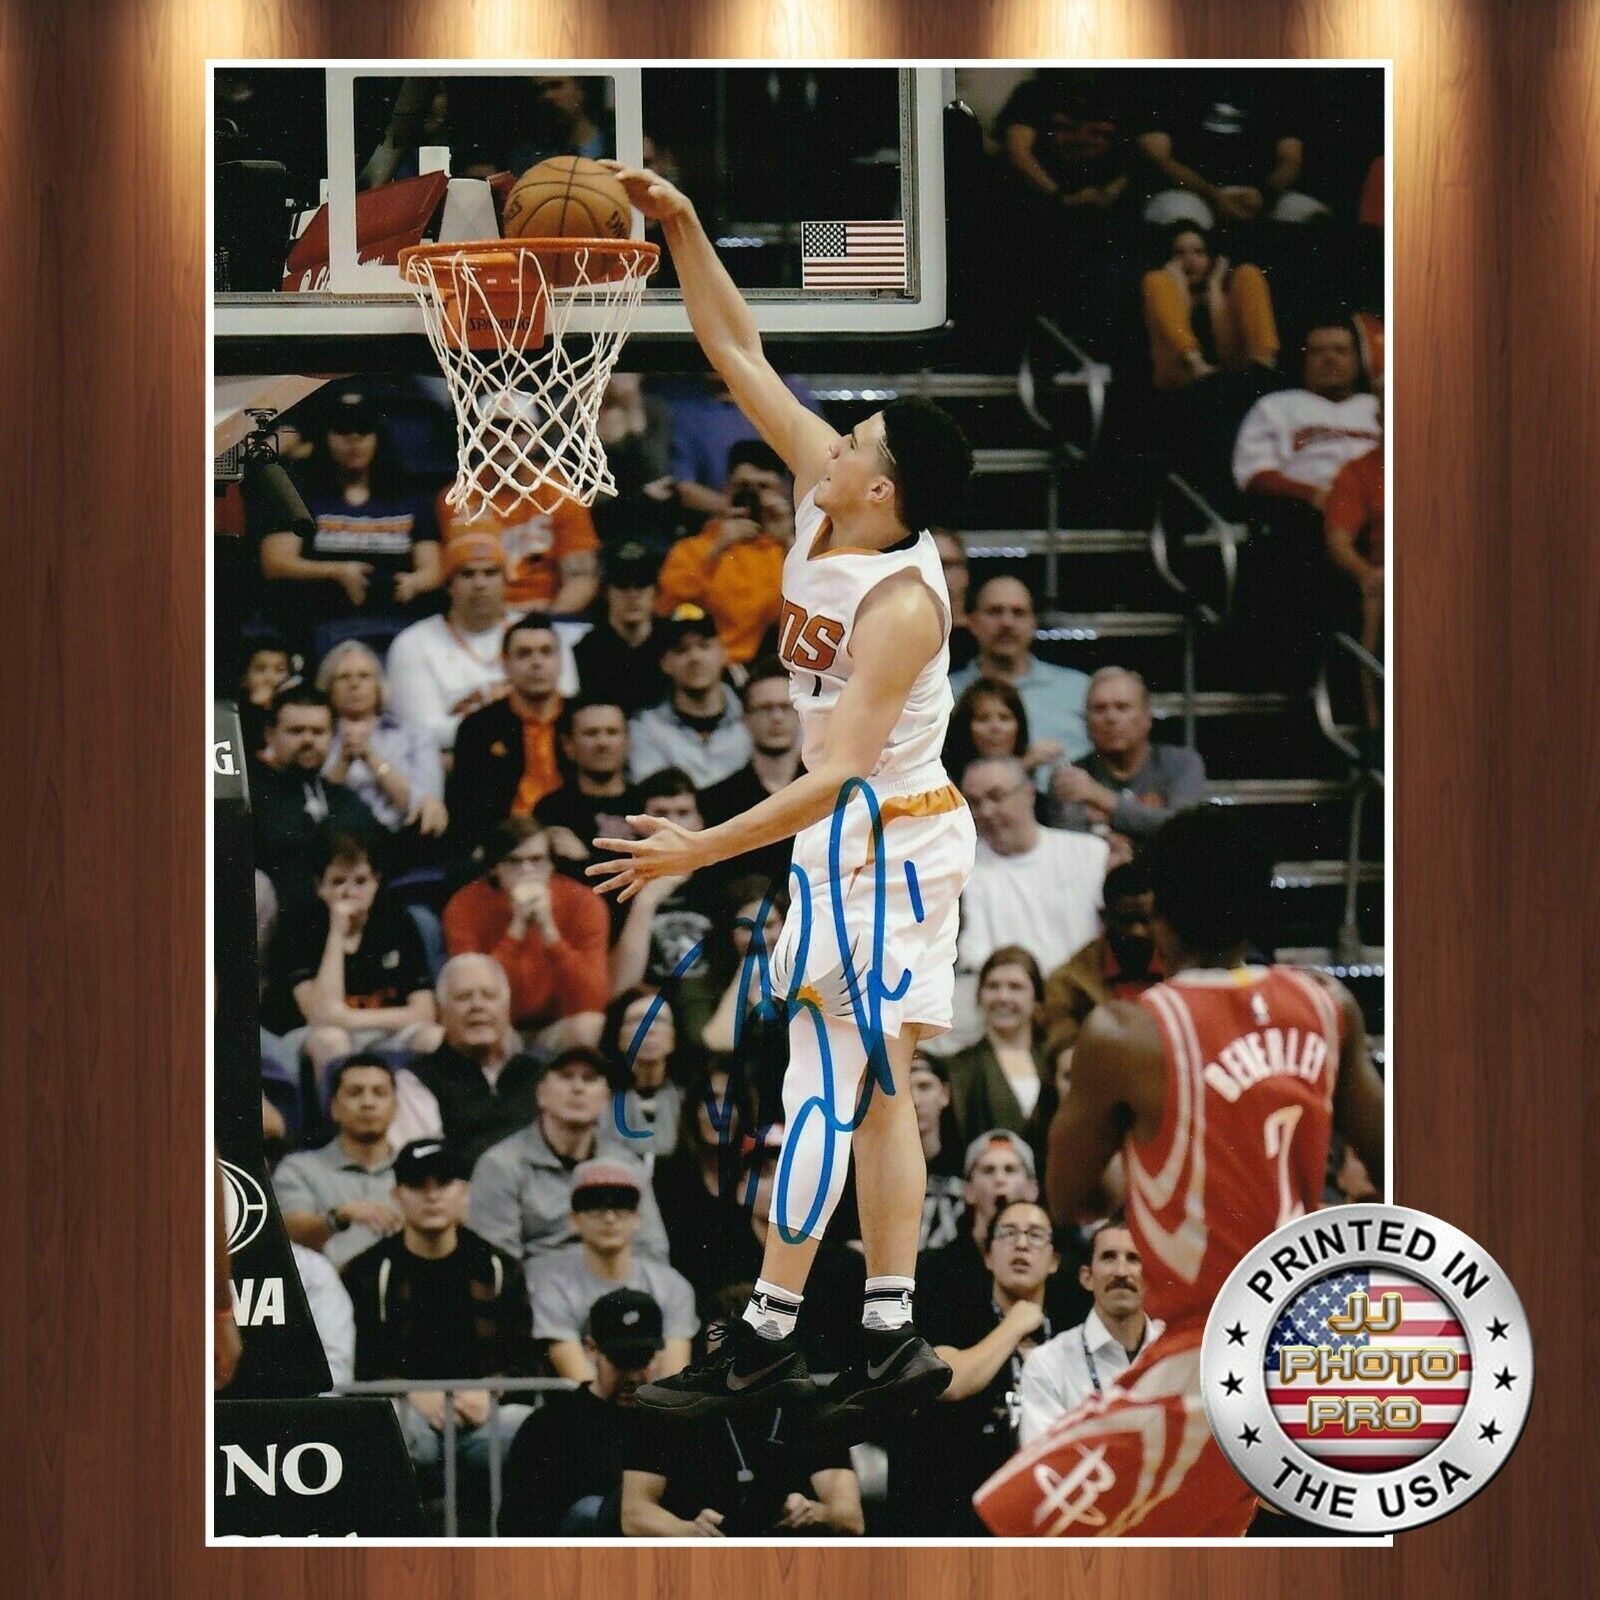 Devin Booker Autographed Signed 8x10 Photo Poster painting (Suns) REPRINT